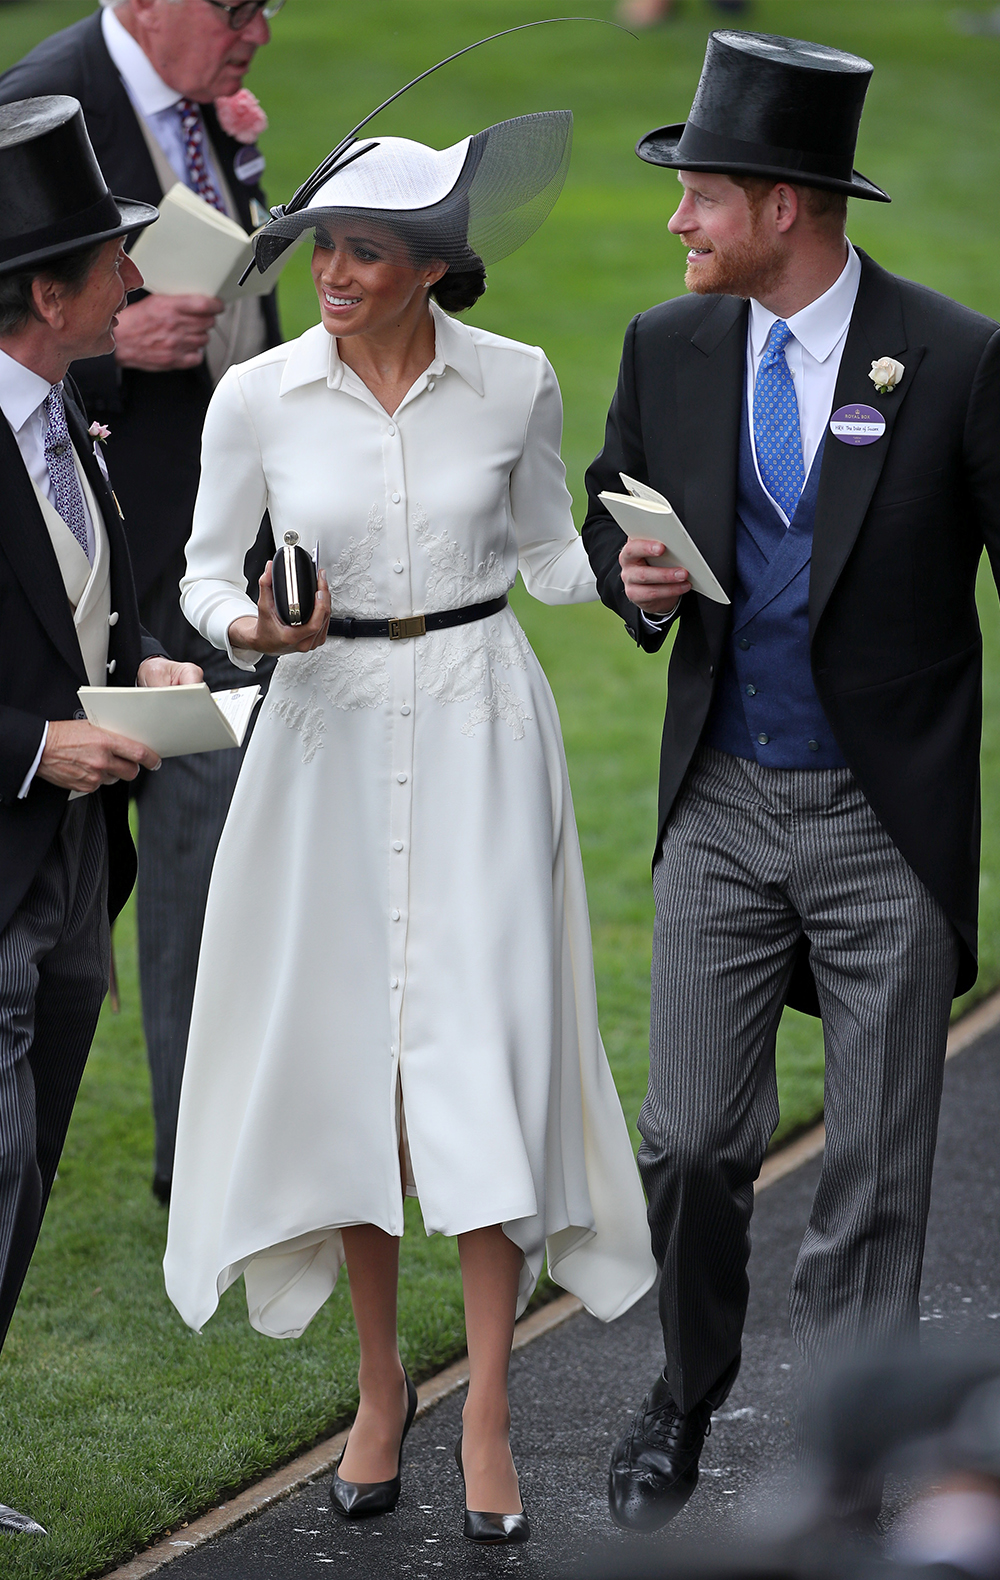 June 19, 2018: Meghan showing her proclivity towards a white dress with a black belt at her first Royal Ascot alongside husband Prince Harry. The dress is Givenchy - the same designer behind her wedding gown -and a Philip Treacy hat. 